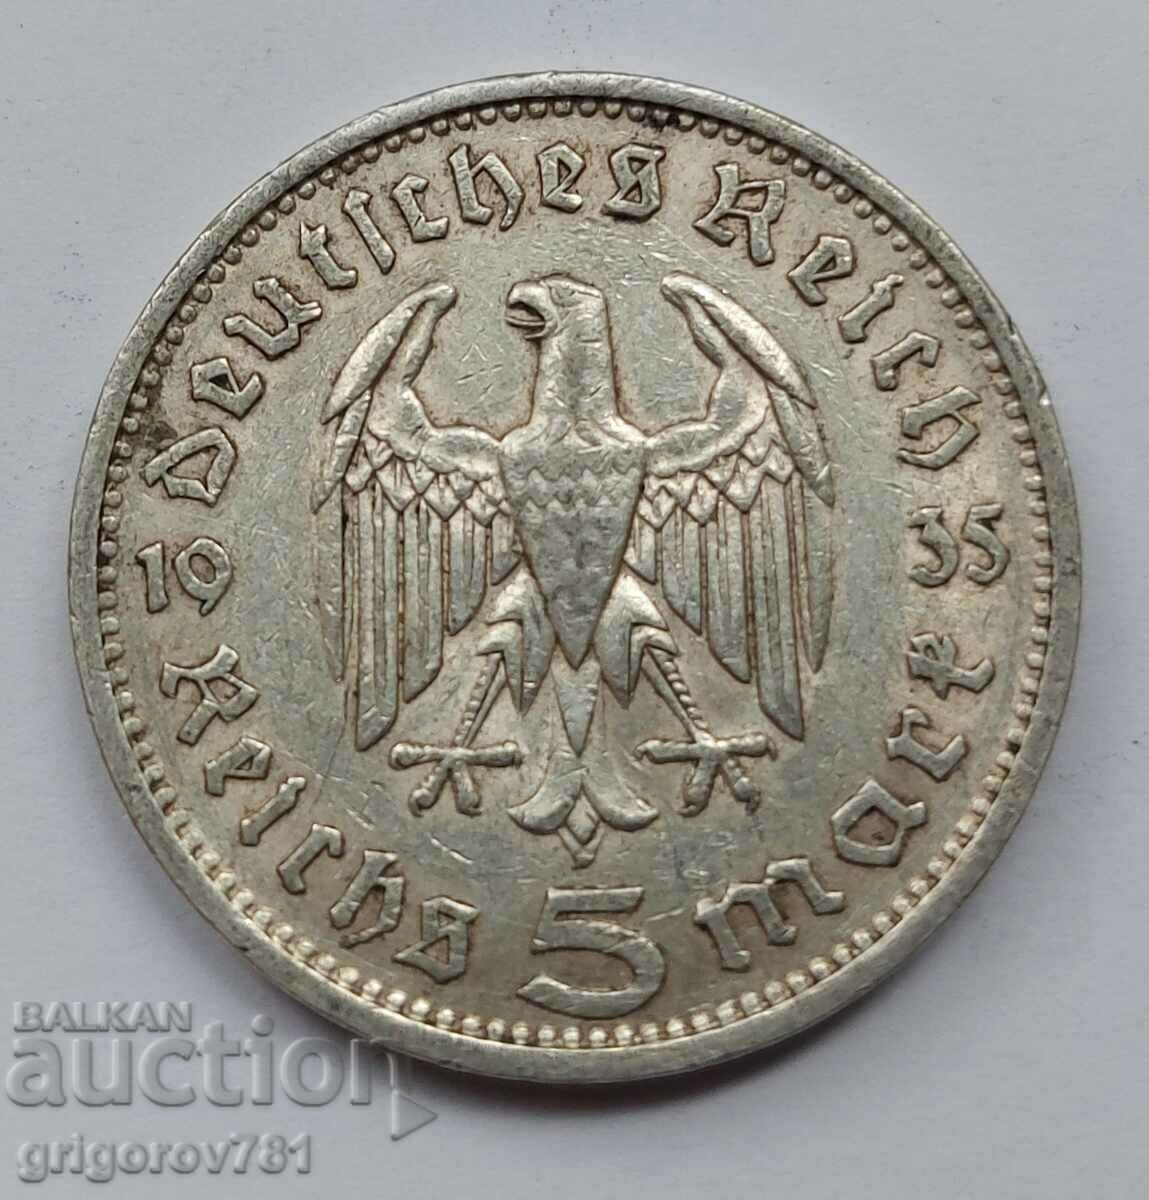 5 Mark Silver Germany 1935 F III Reich Silver Coin #72